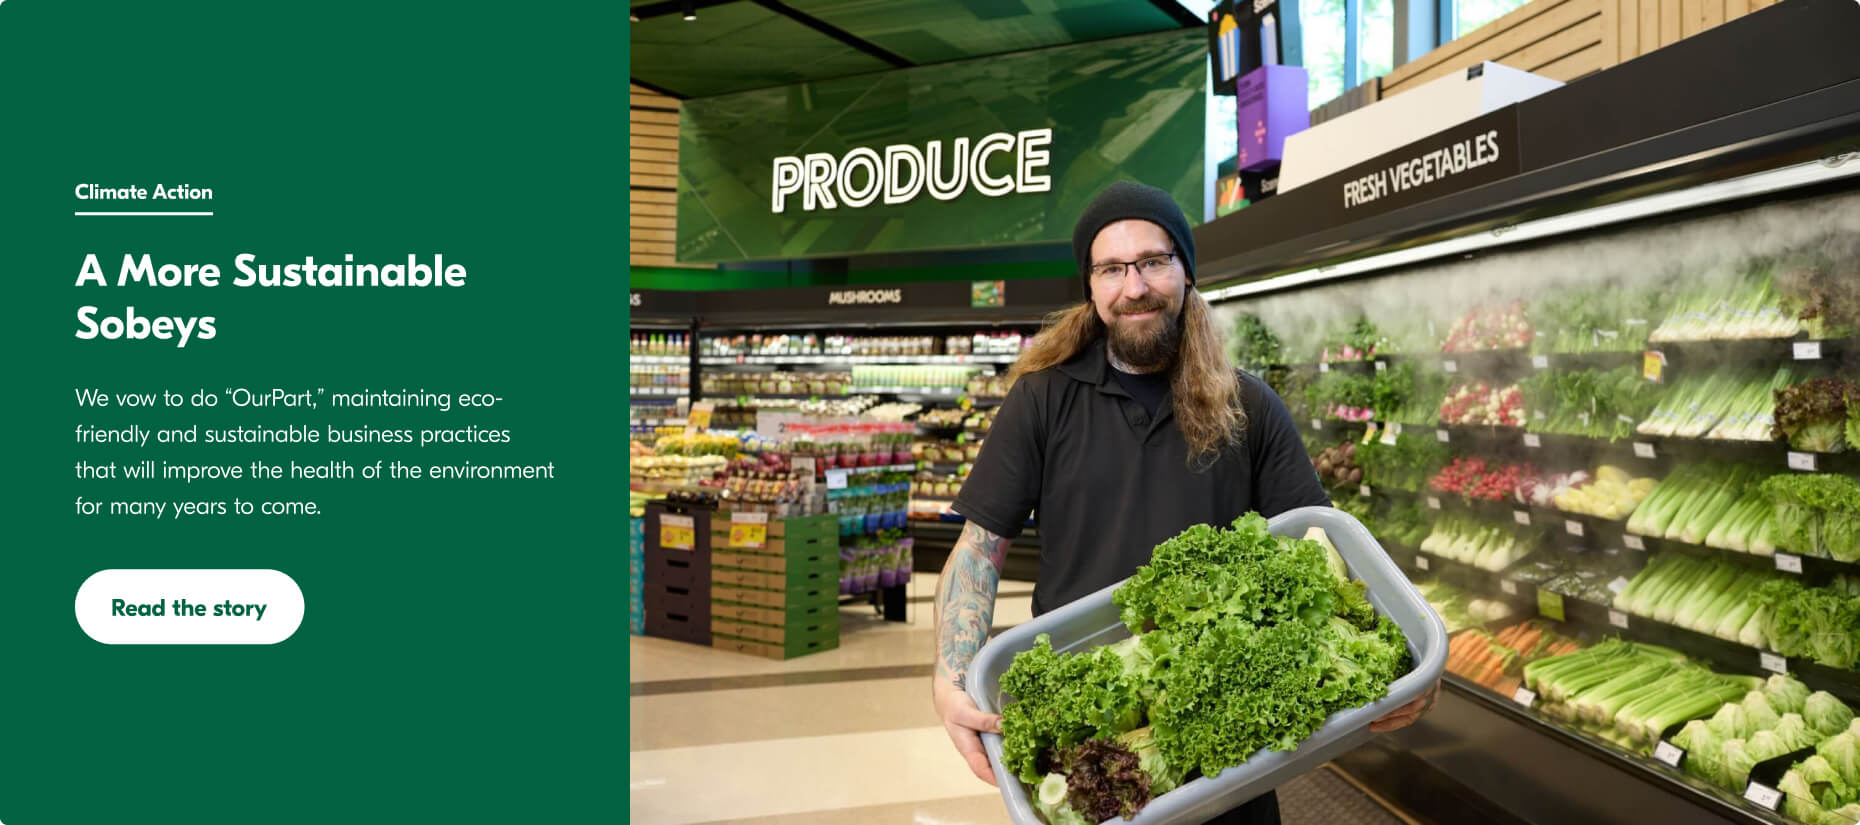 This image shows a man wearing a black cap and t-shirt. He works in a vegetable store at Sobeys and is standing with a basket full of green vegetables in front of a rack stand.